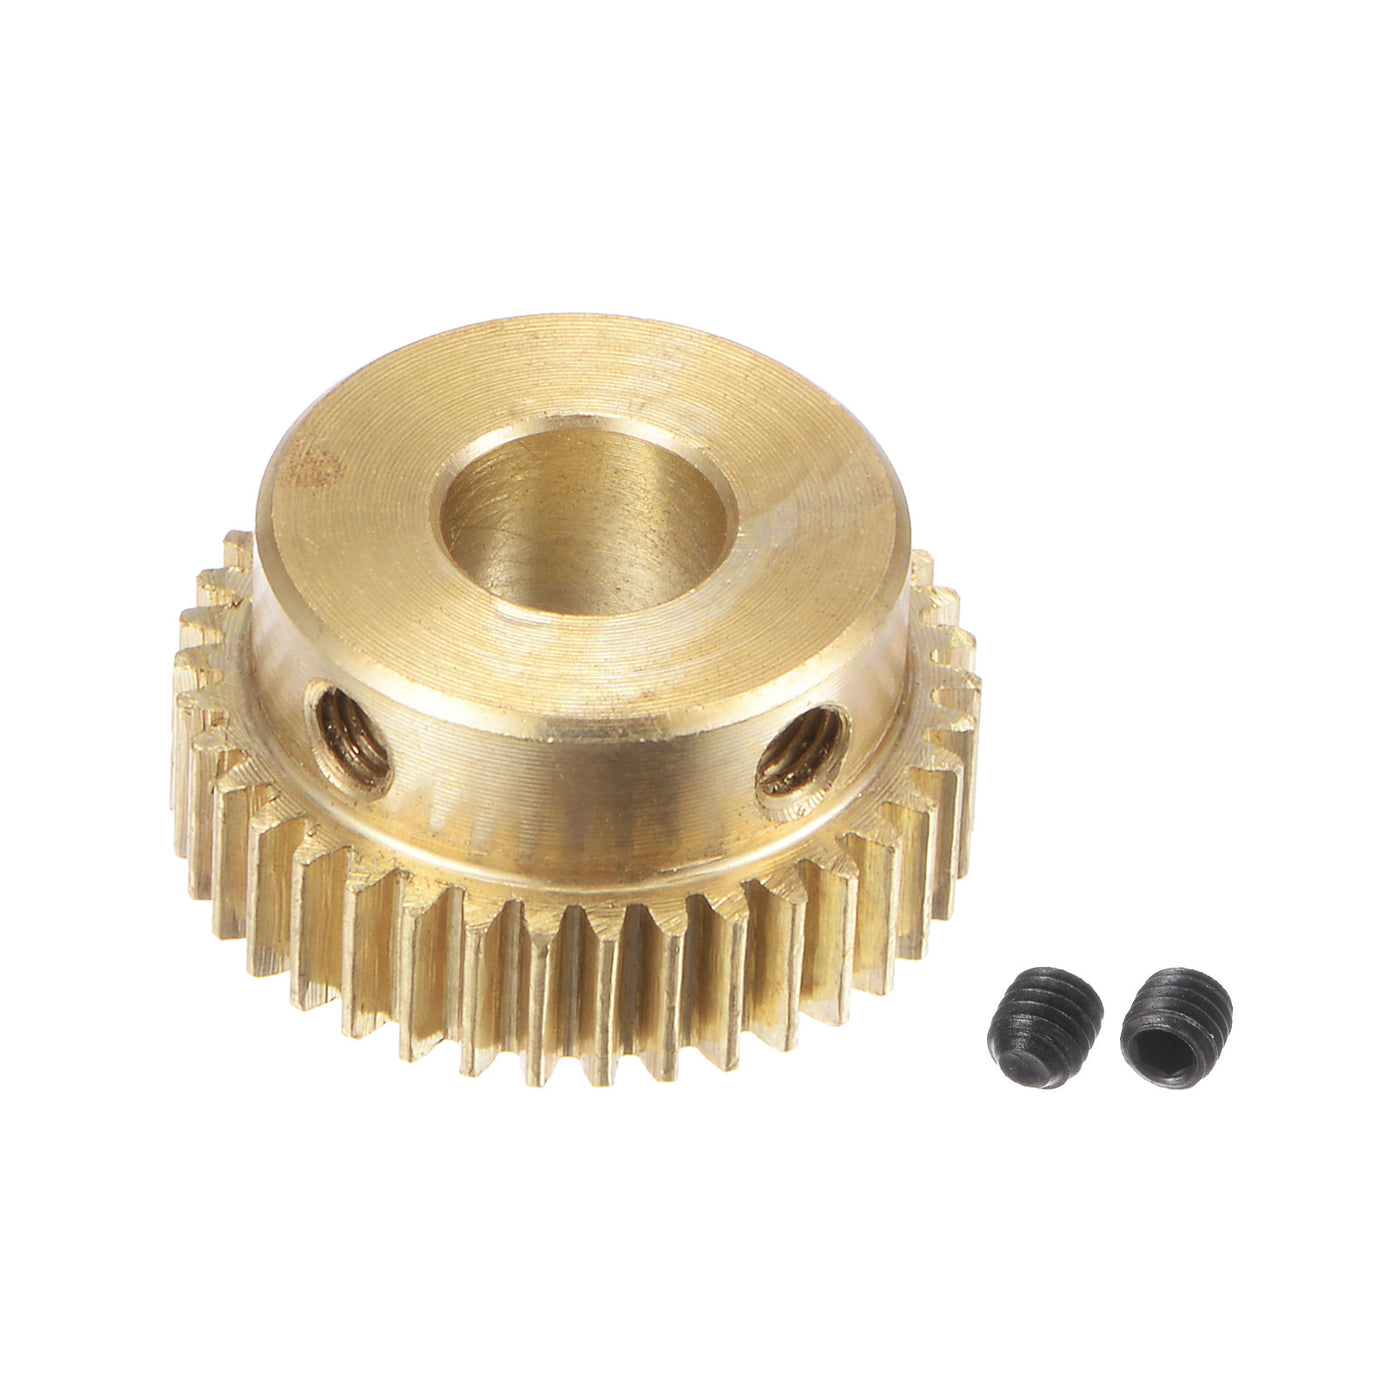 uxcell Uxcell 0.5 Mod 38T 6.35mm Bore 20mm Outer Dia Brass Motor Rack Pinion Gear with Screws